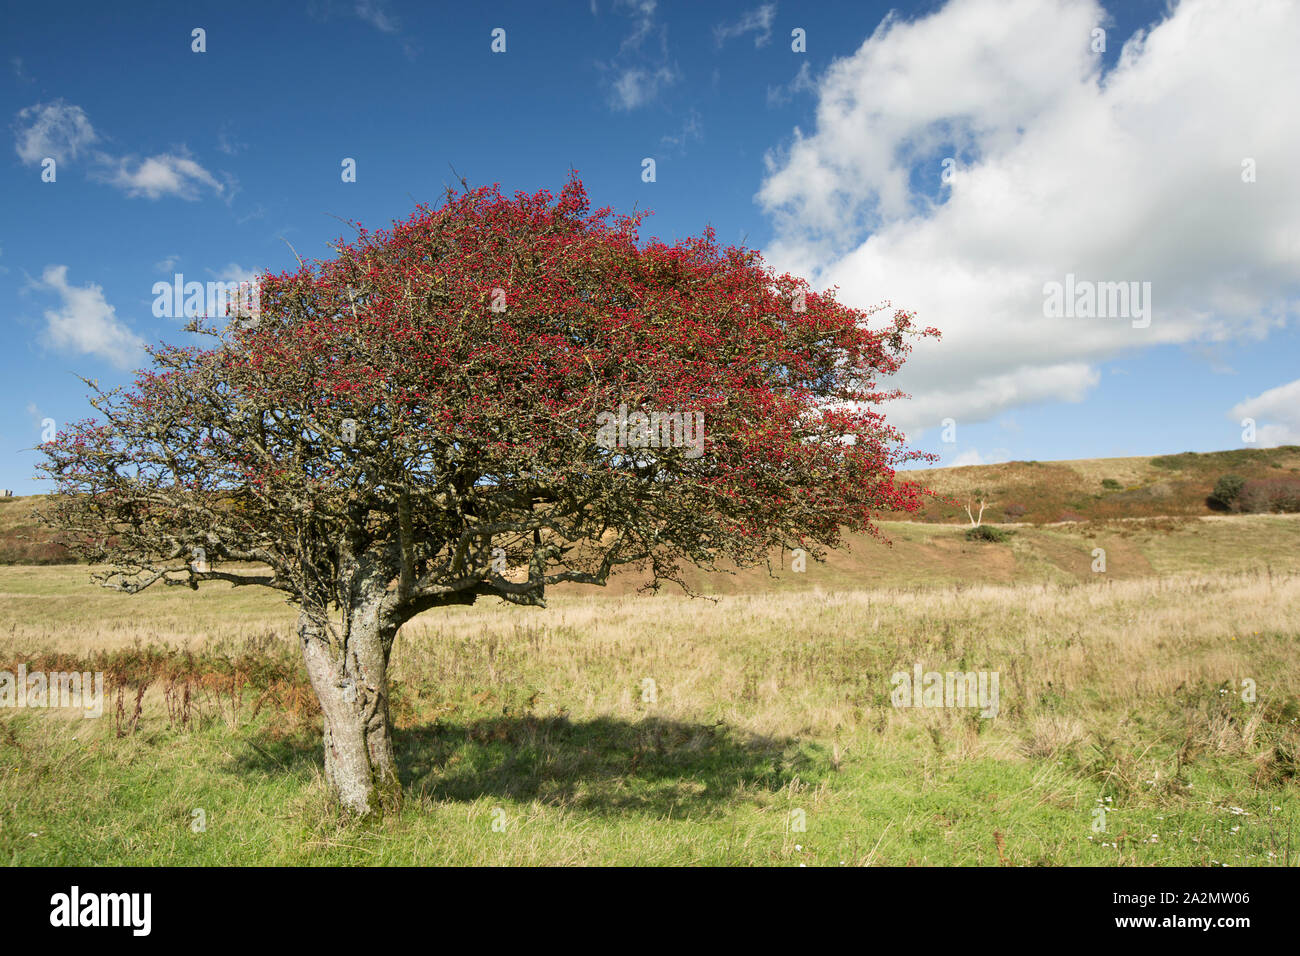 A Common Hawthorn tree, Cretaegus monogyna, laden with ripe berries, that has been shaped by prevailing winds growing on a hillside above Chesil beach Stock Photo